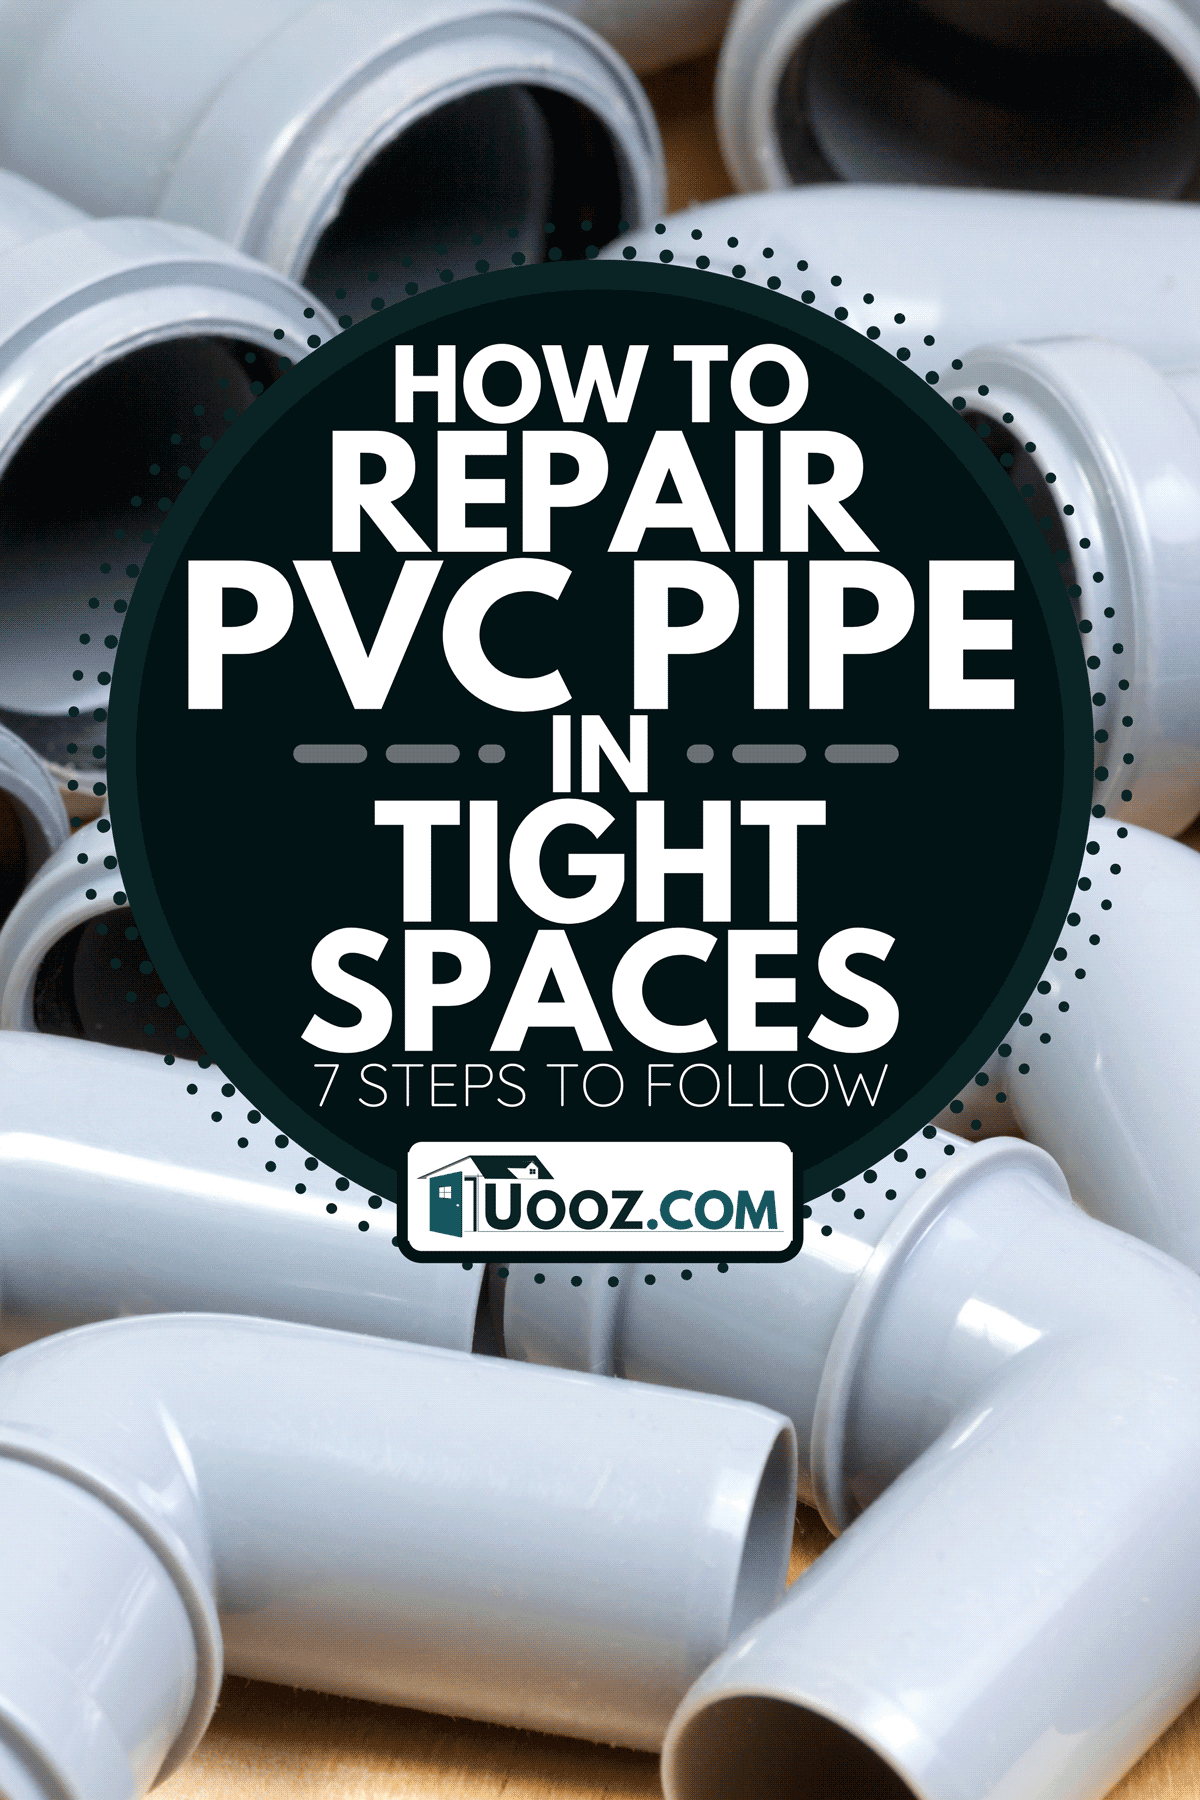 Gray PVC sewer pipes, How To Repair PVC Pipe In Tight Spaces [7 Steps To Follow]